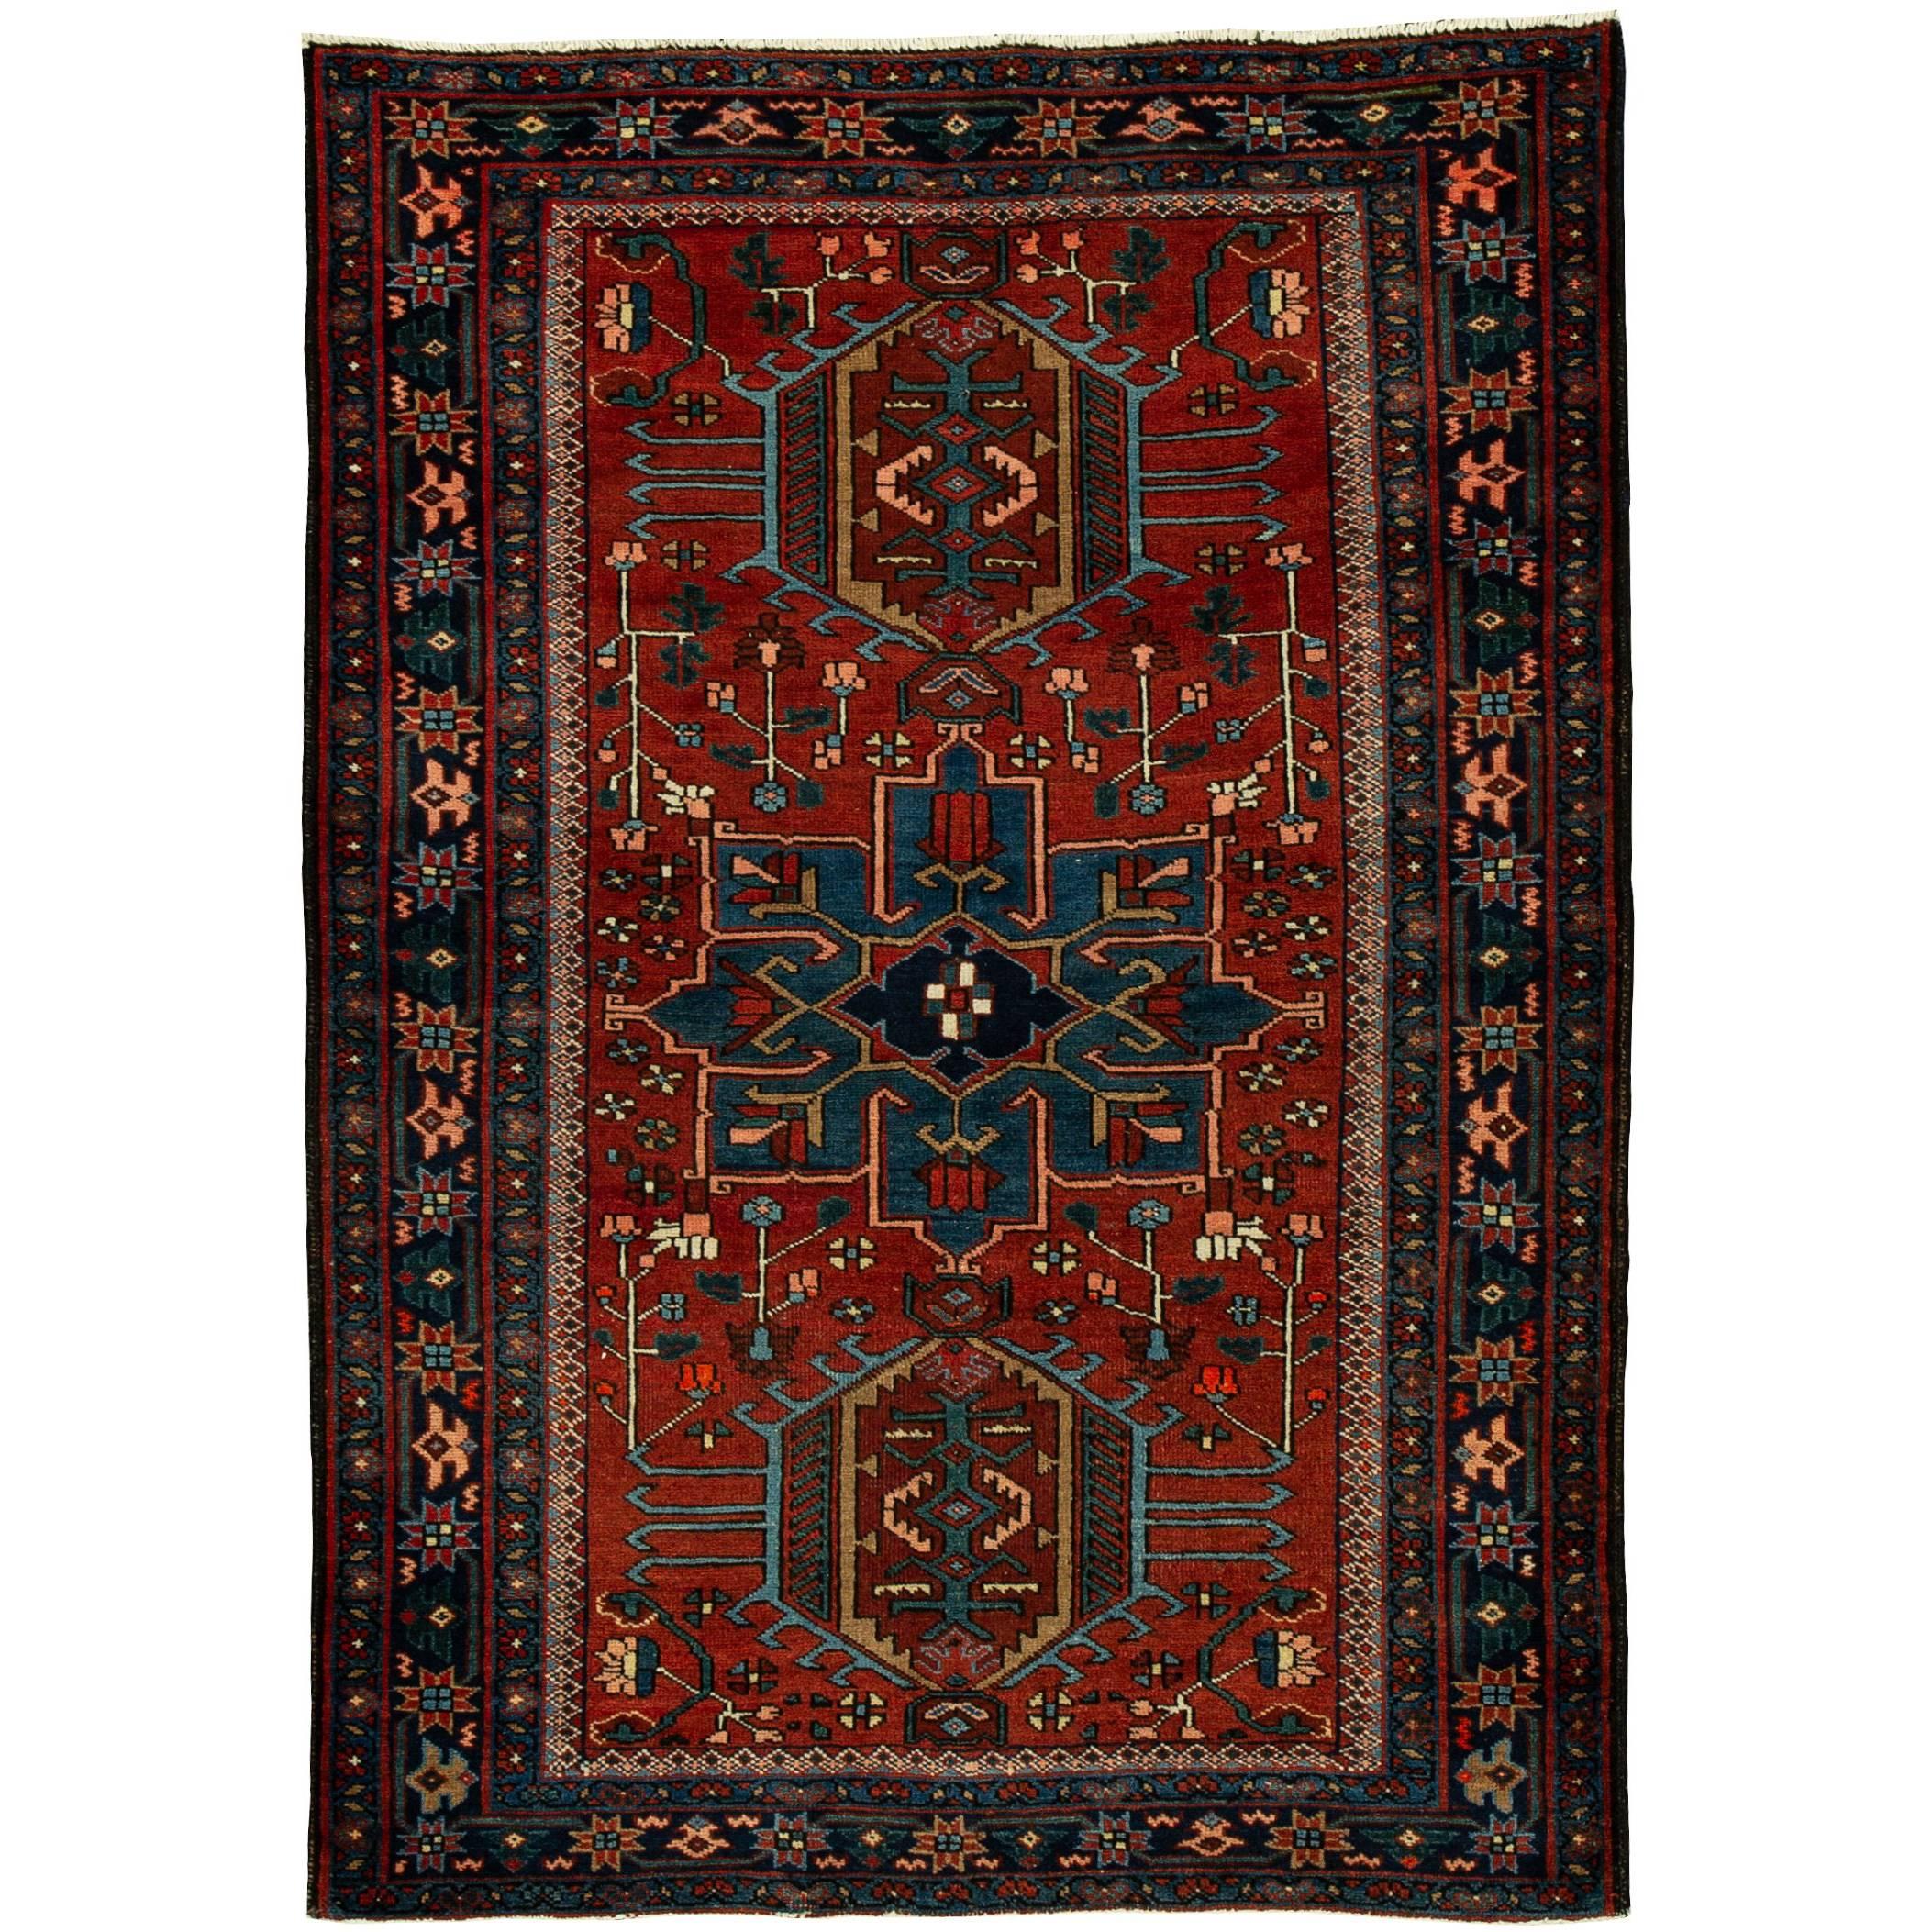 Antique Red and Blue Persian Heriz Rug